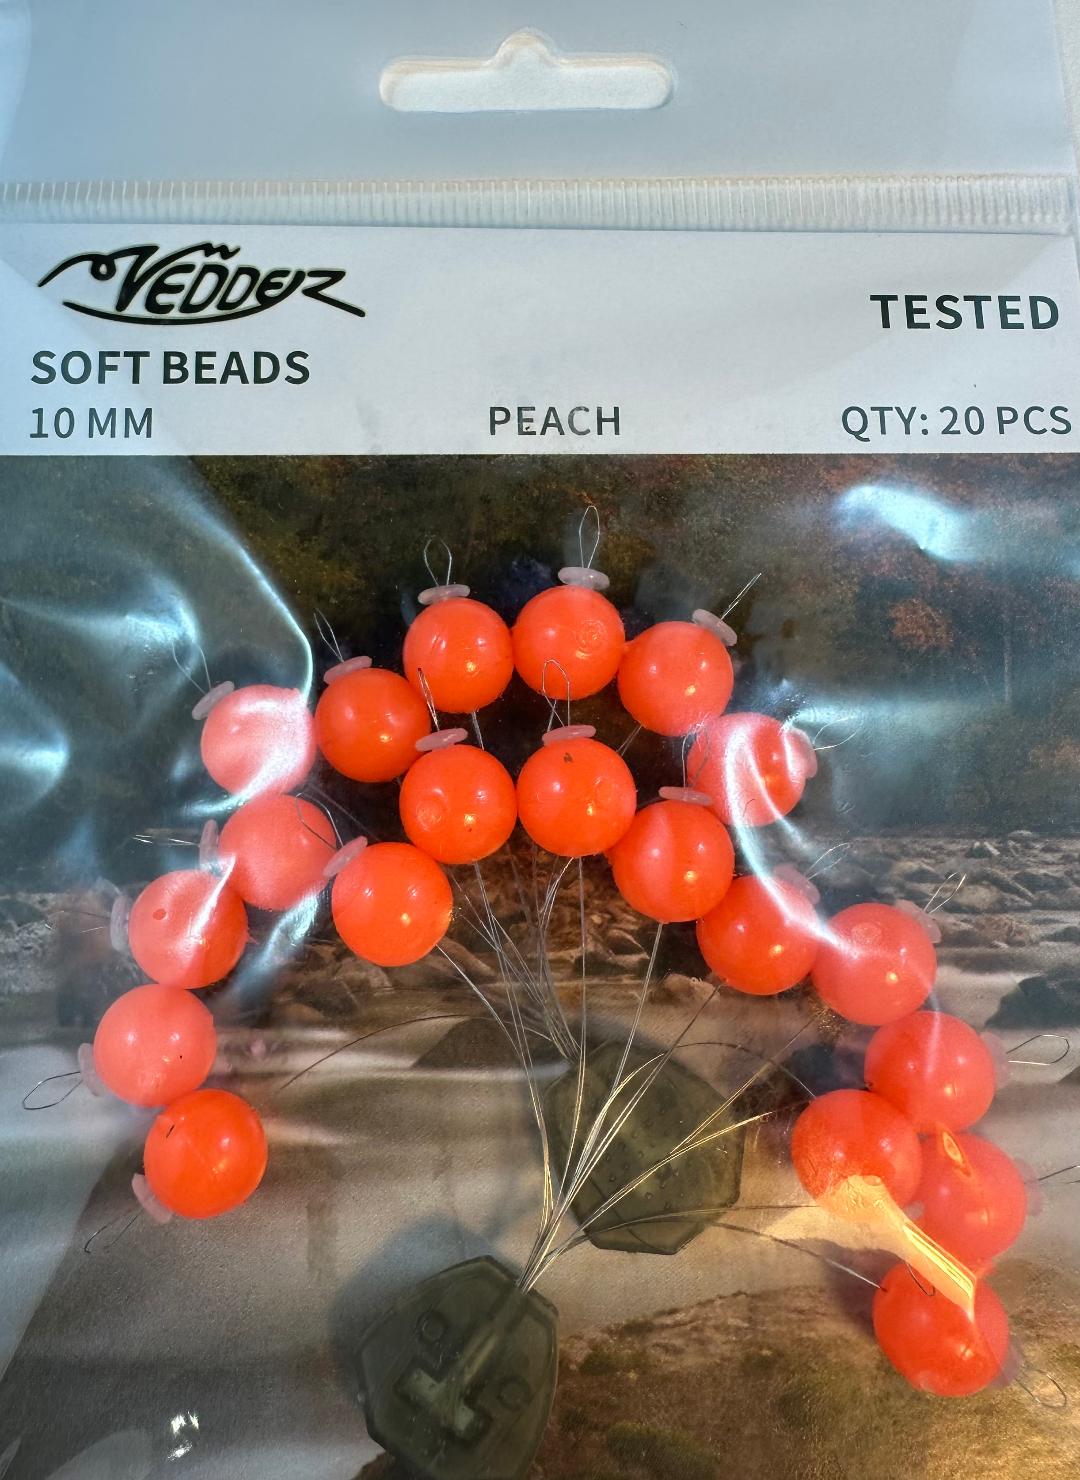 VSB-Peach 10 Vedder 10 mm Peach Soft Beads x 20 with Stoppers x 20